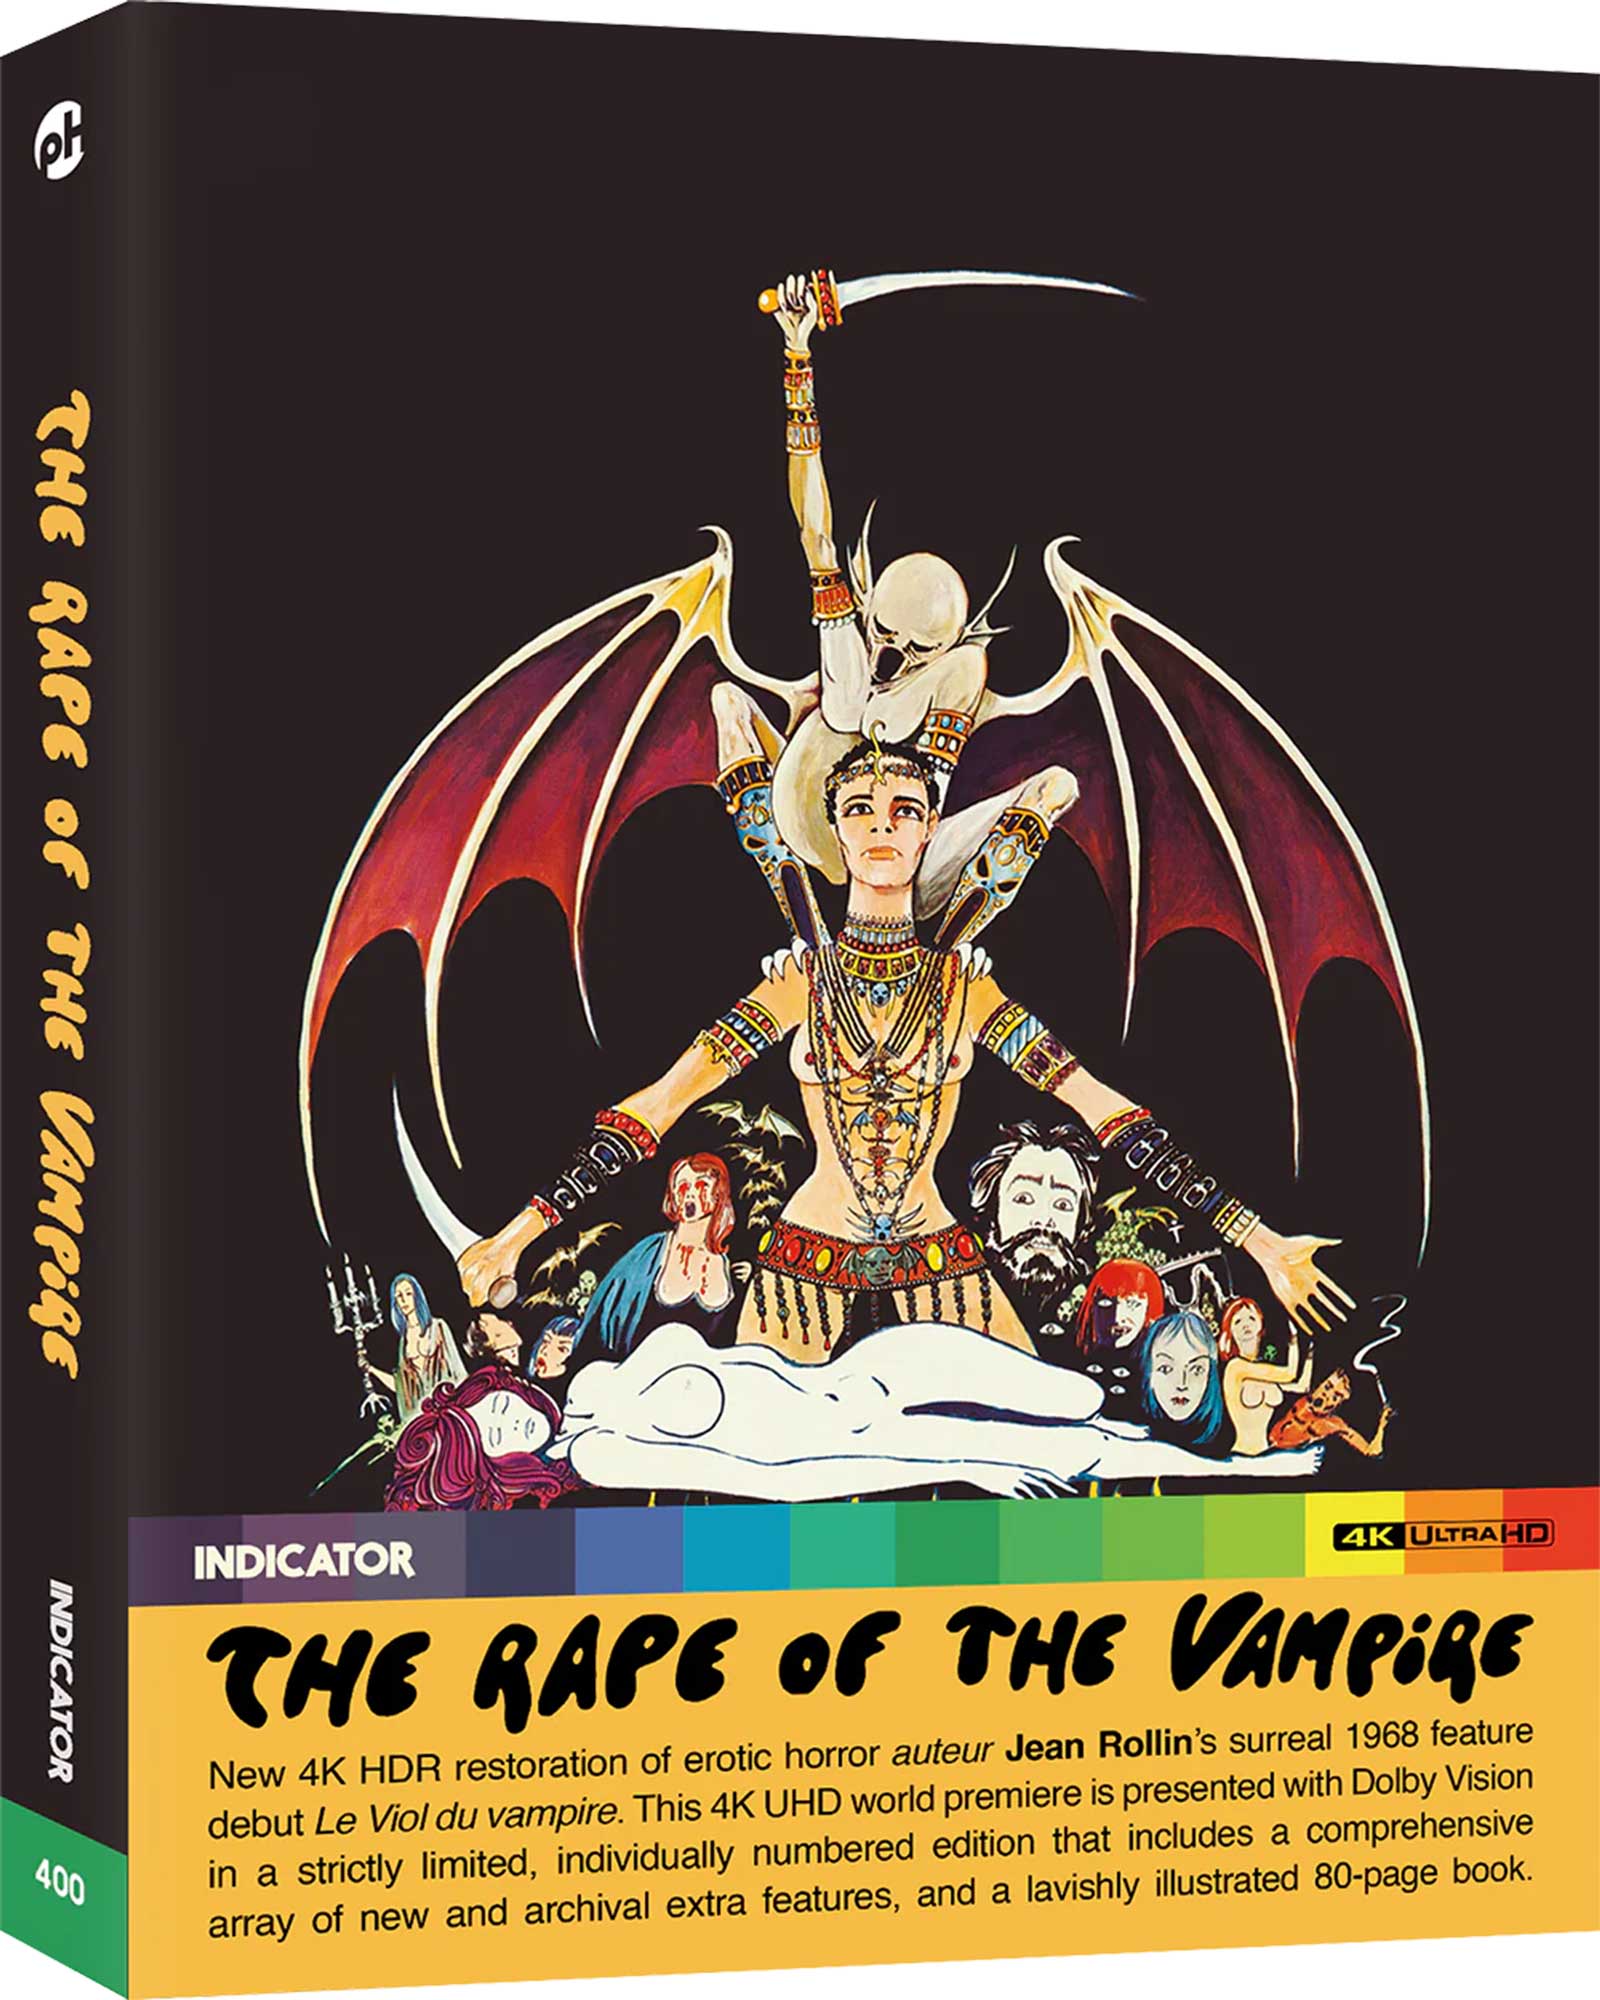 Rape of The Vampire in 4K and Blu-ray UHD